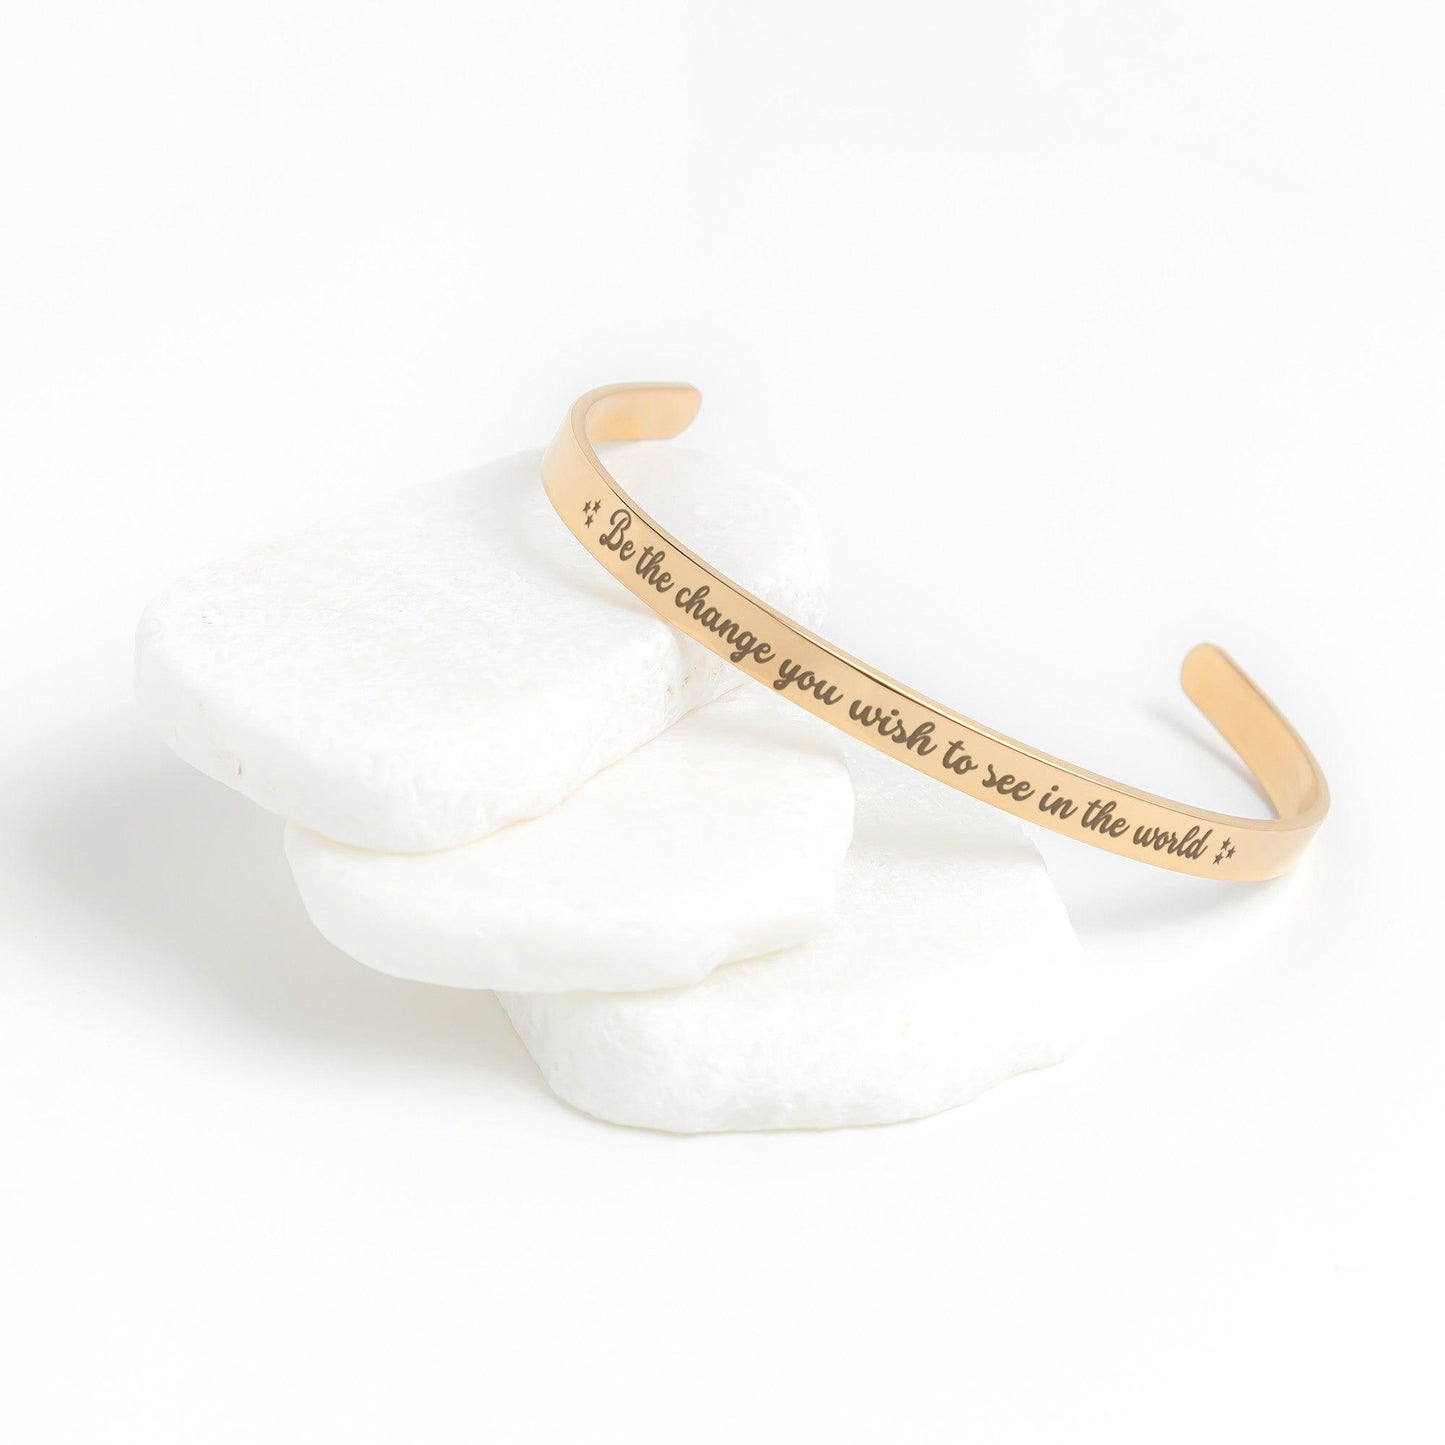 Inspirational Jewelry Cuff Bracelet - Be the change you wish to see in the world Bracelet - Giftsmojo